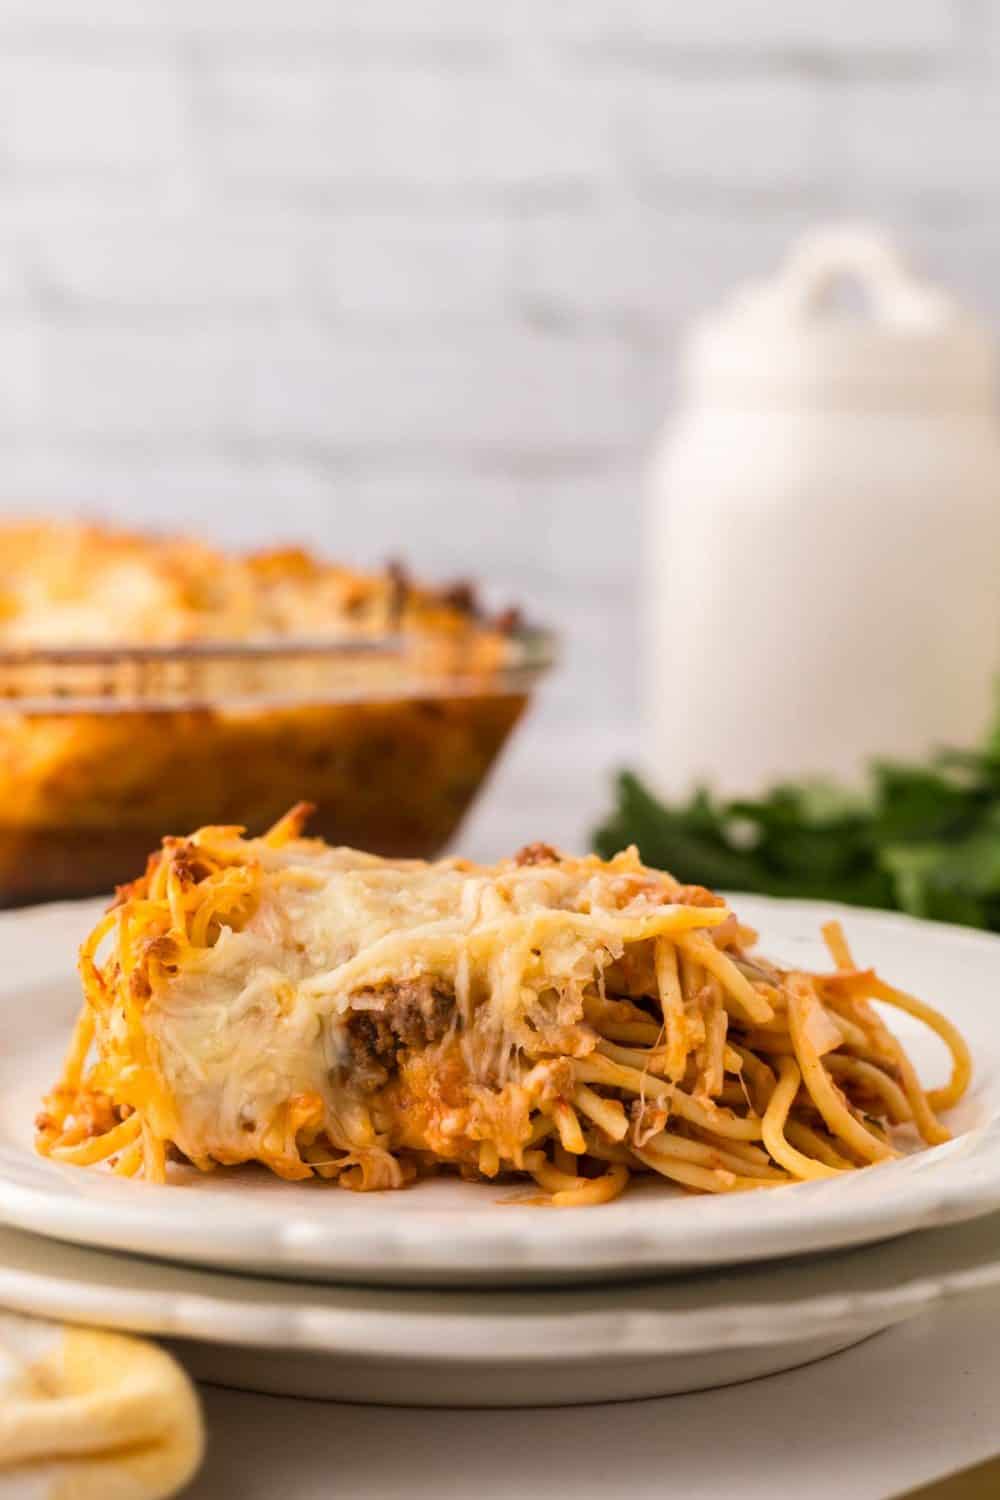 Baked spaghetti served on a white plate.